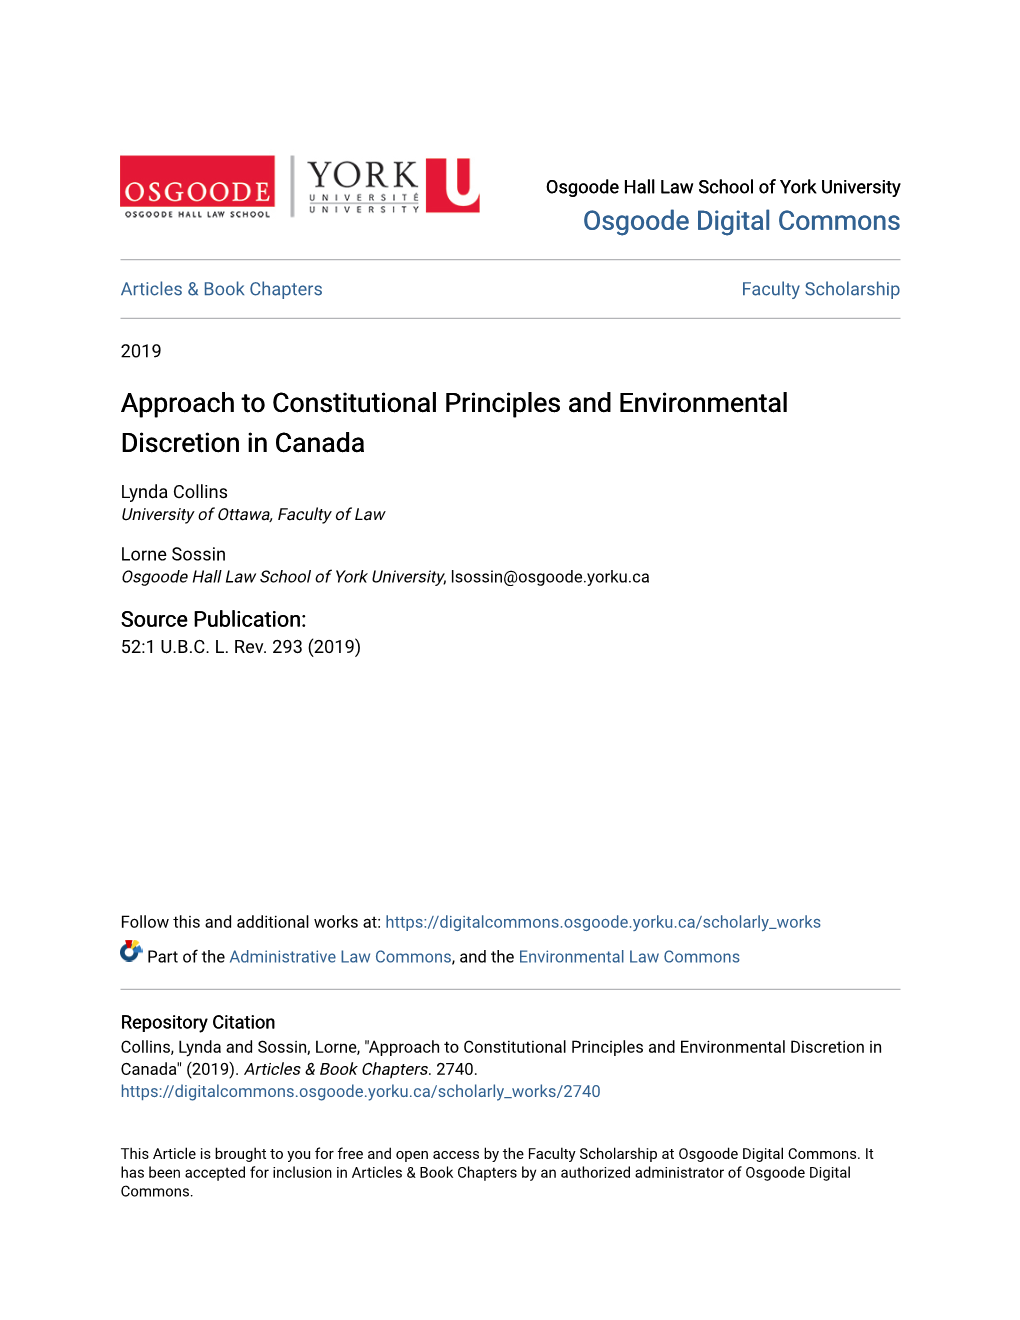 Approach to Constitutional Principles and Environmental Discretion in Canada